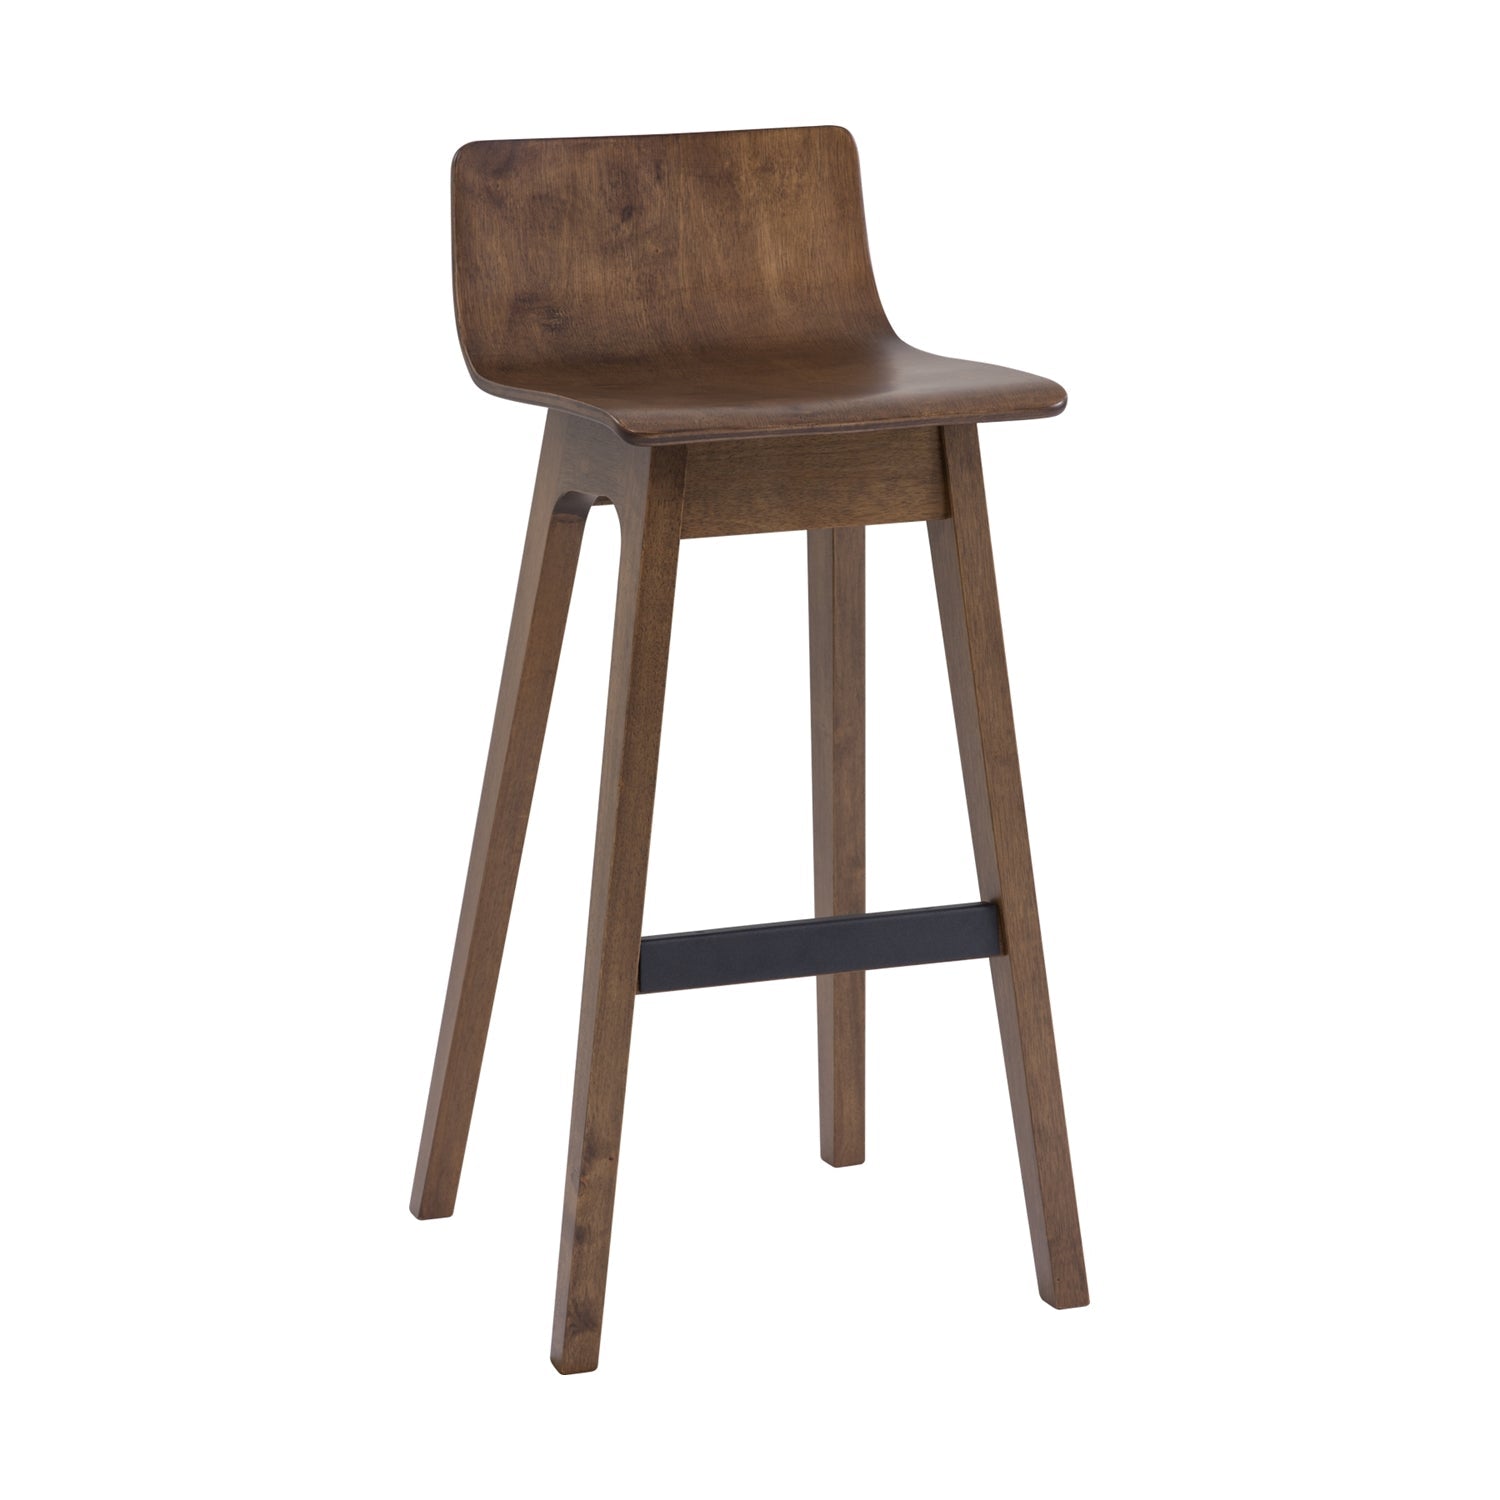 Ava Low Back Bar Chair - Cocoa